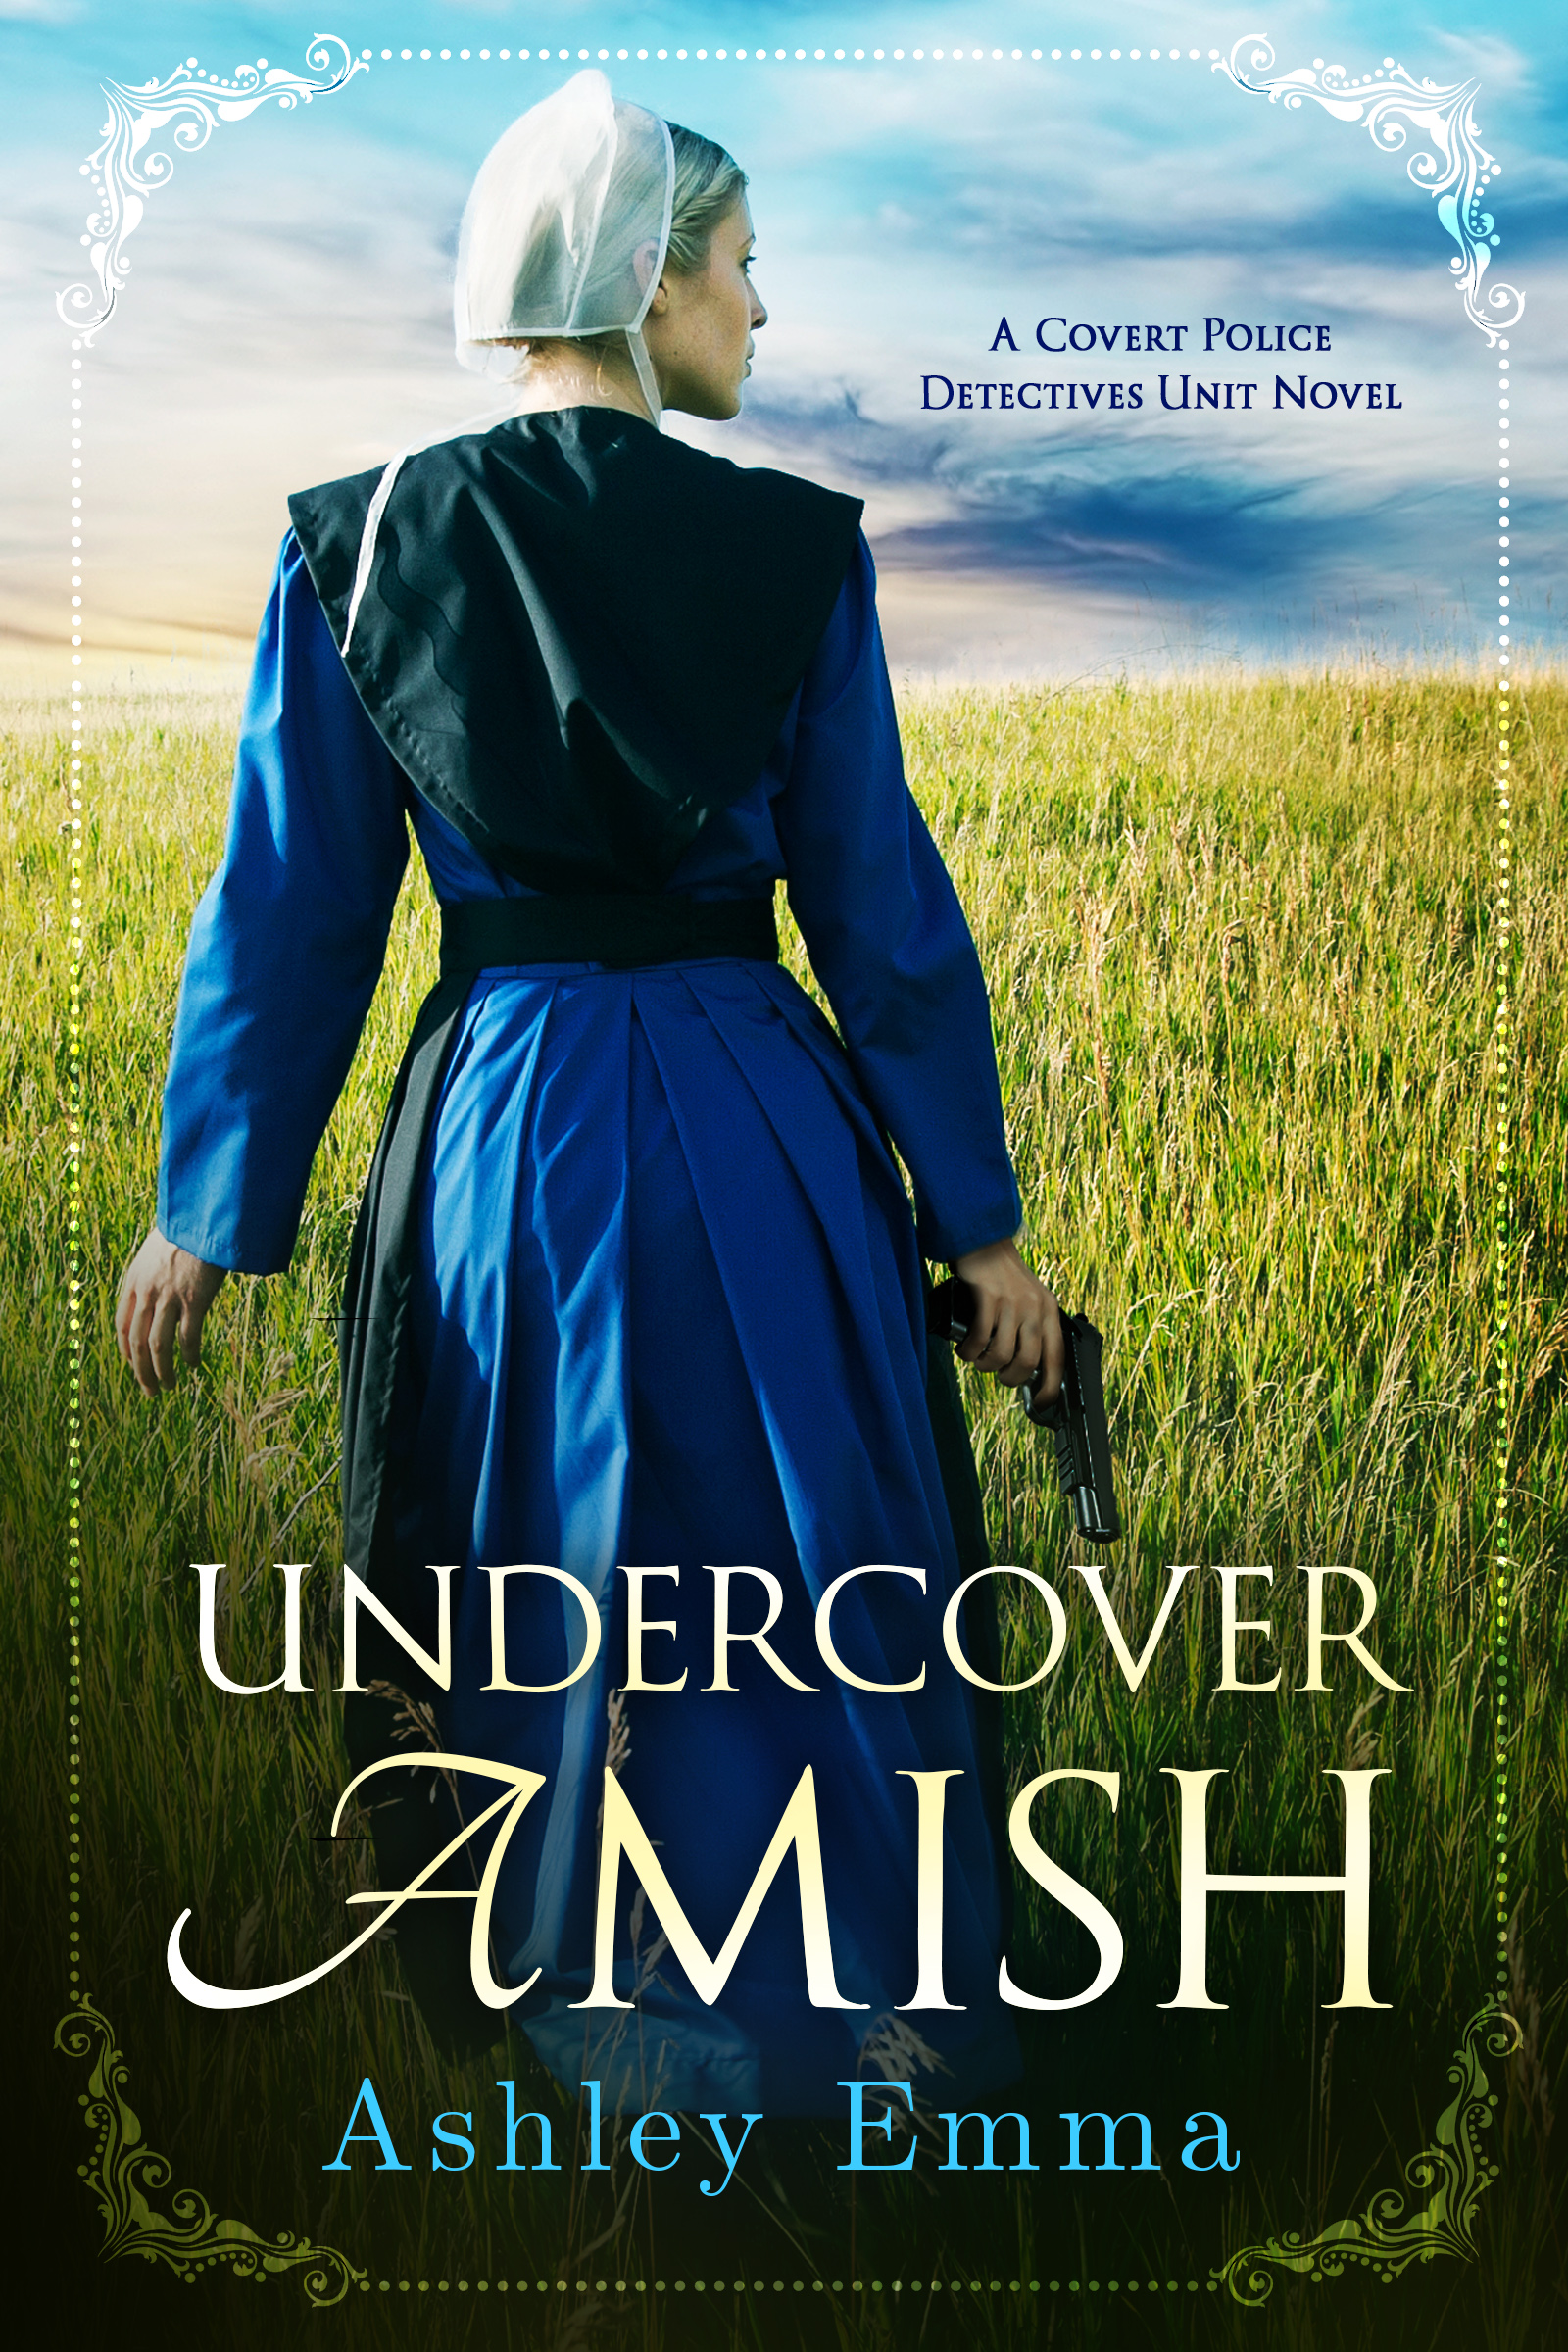 Undercover_Amish_Final.jpg